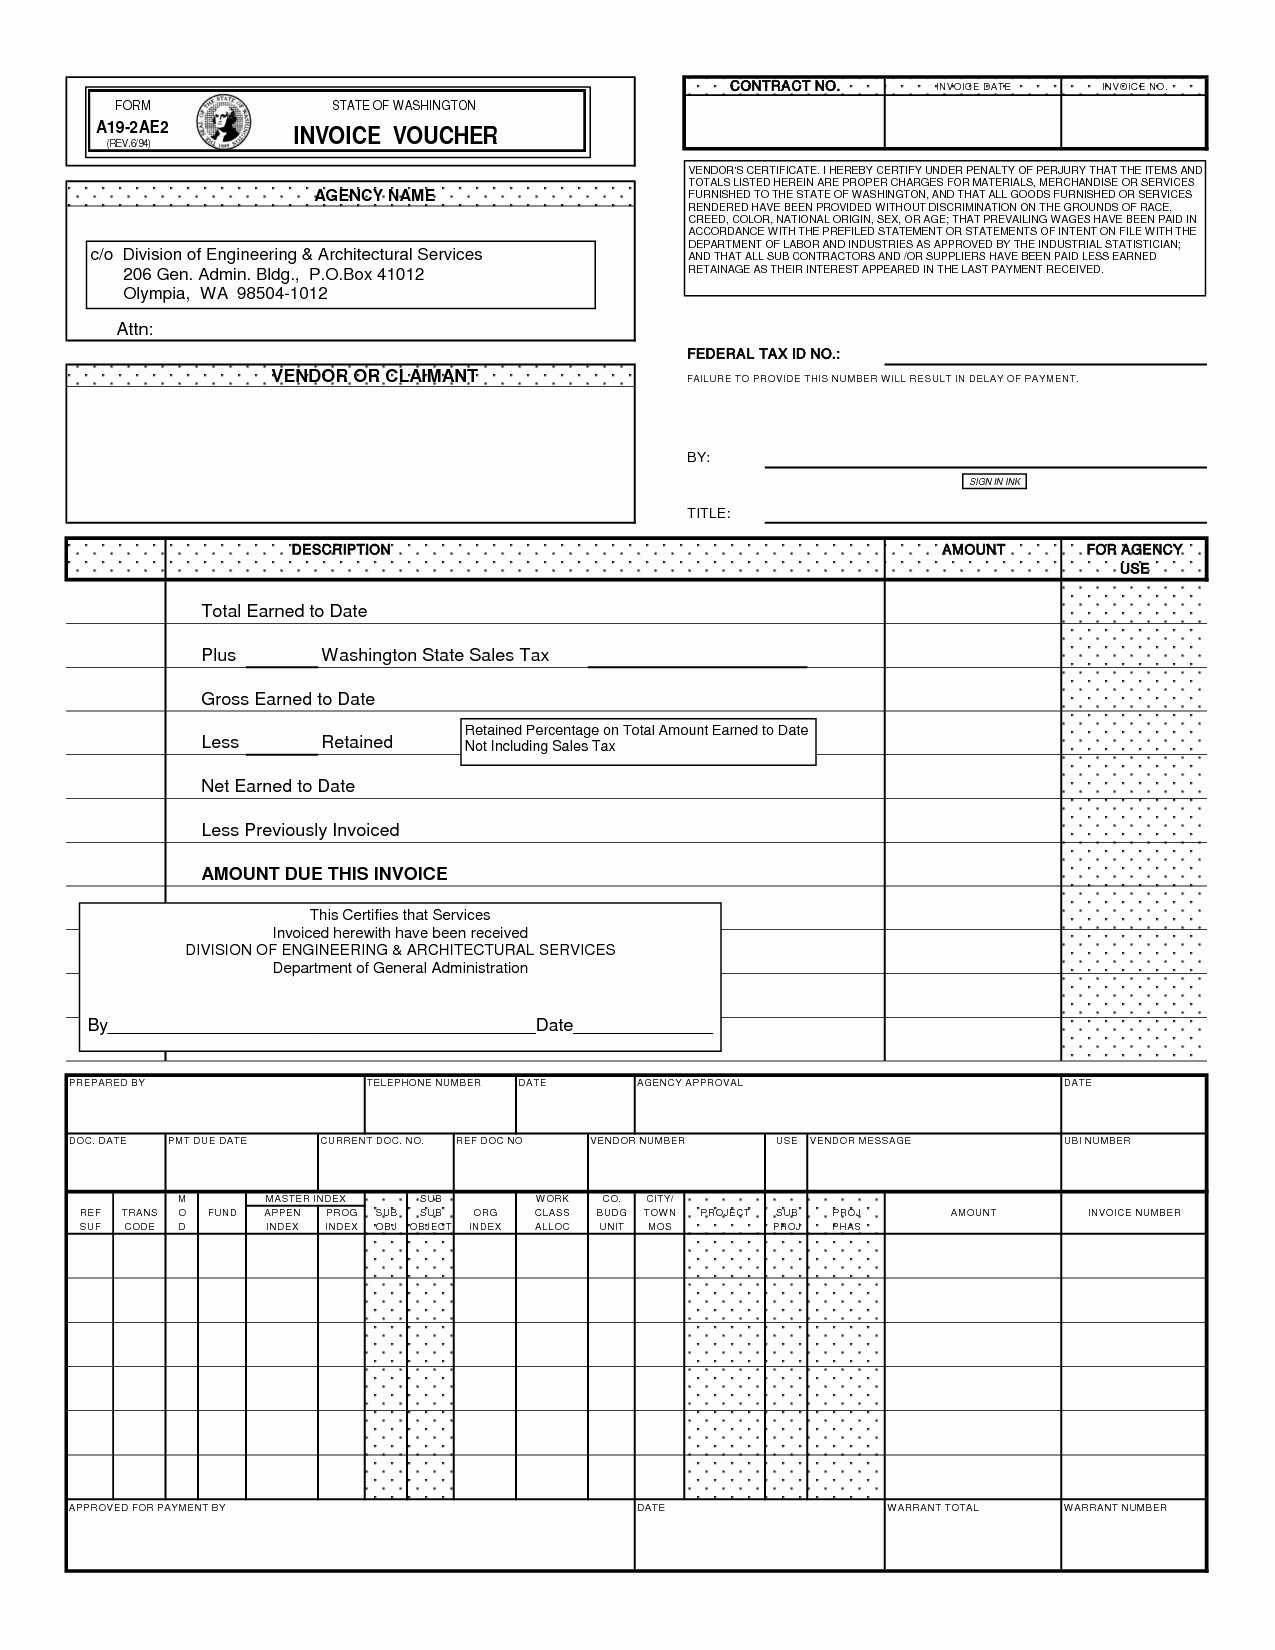 Independent Contractor Invoice Template Pdf New Independent Contractor Invoice Invoice Template Ideas